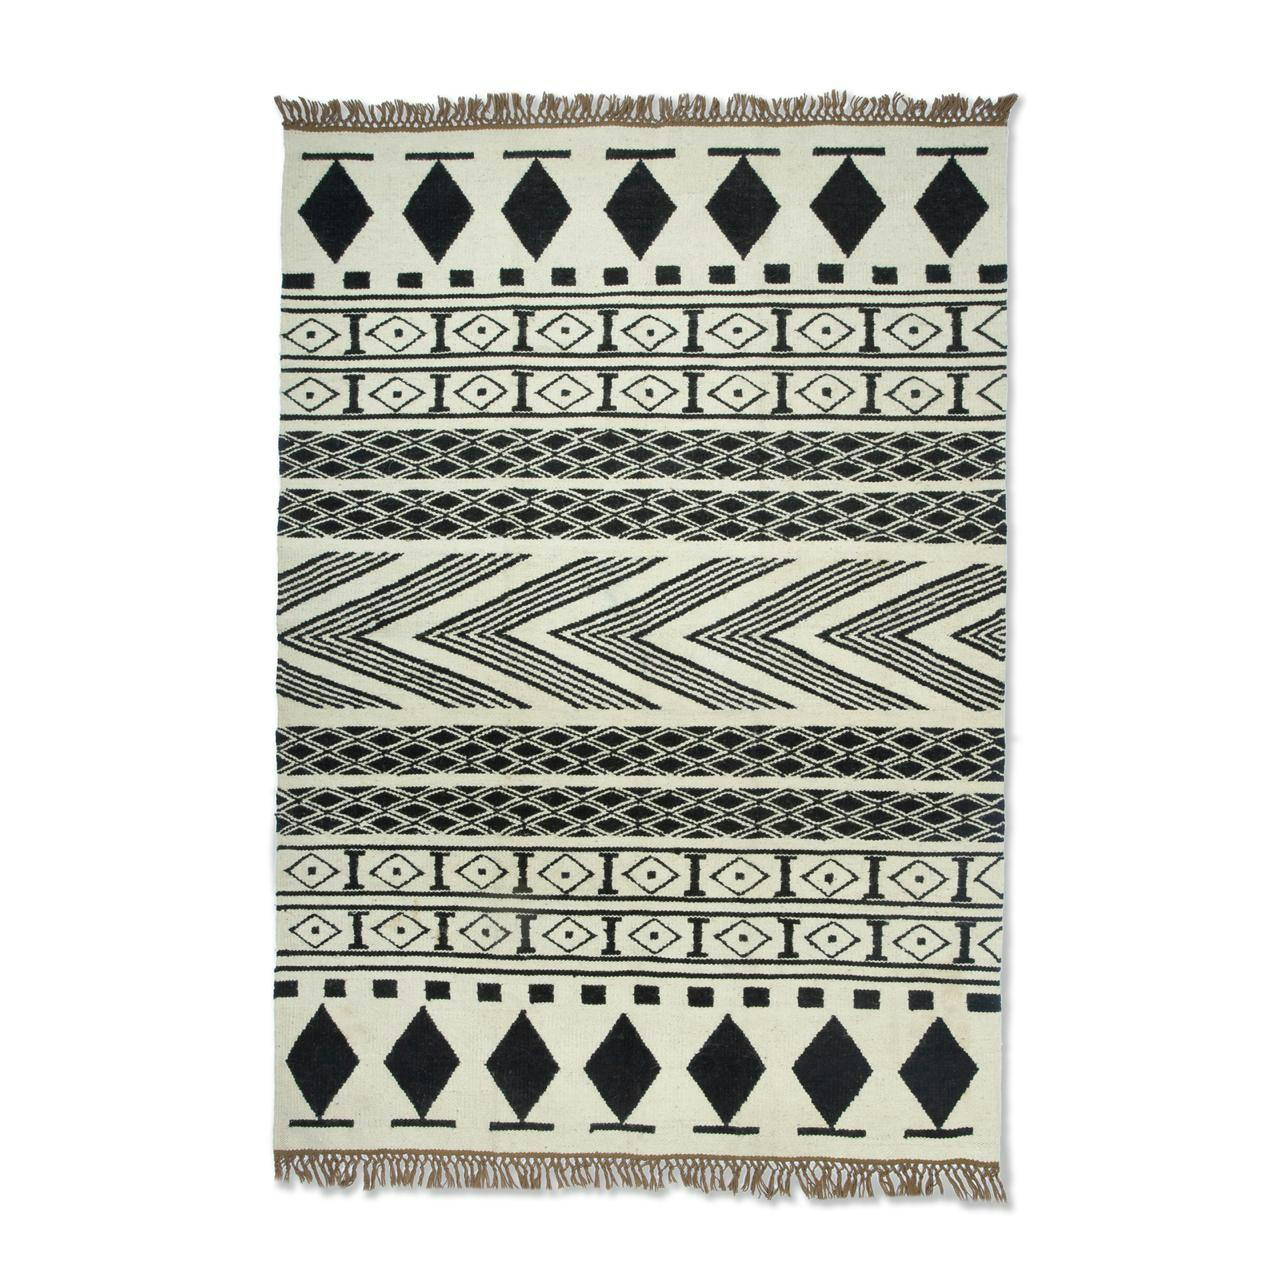 Black and White Patterned Rug 1